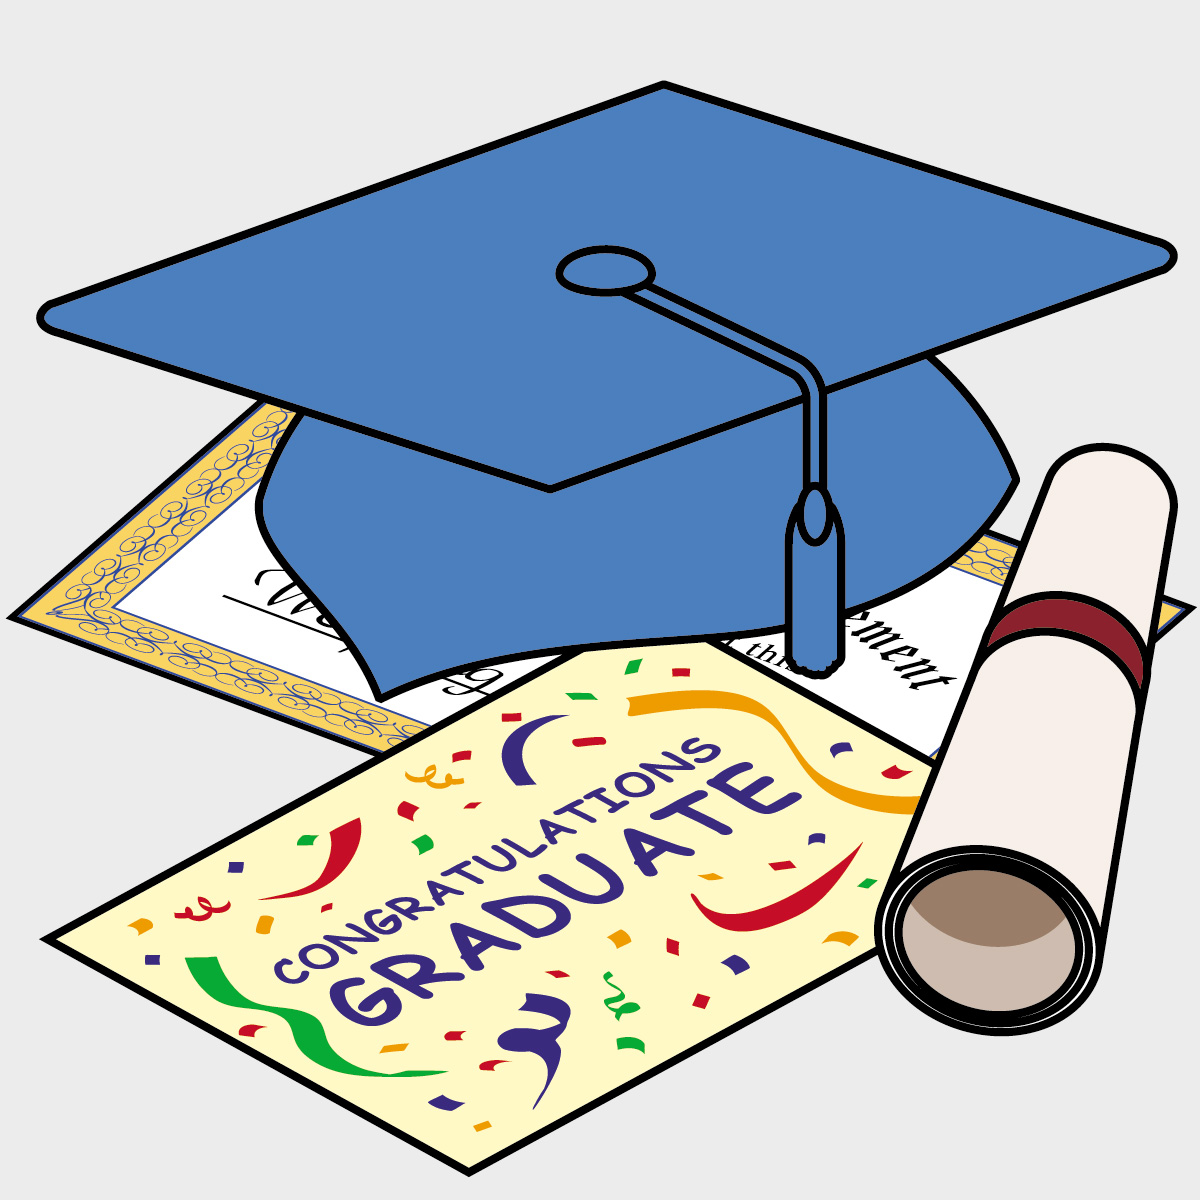 free clipart images for teachers and schools - photo #16